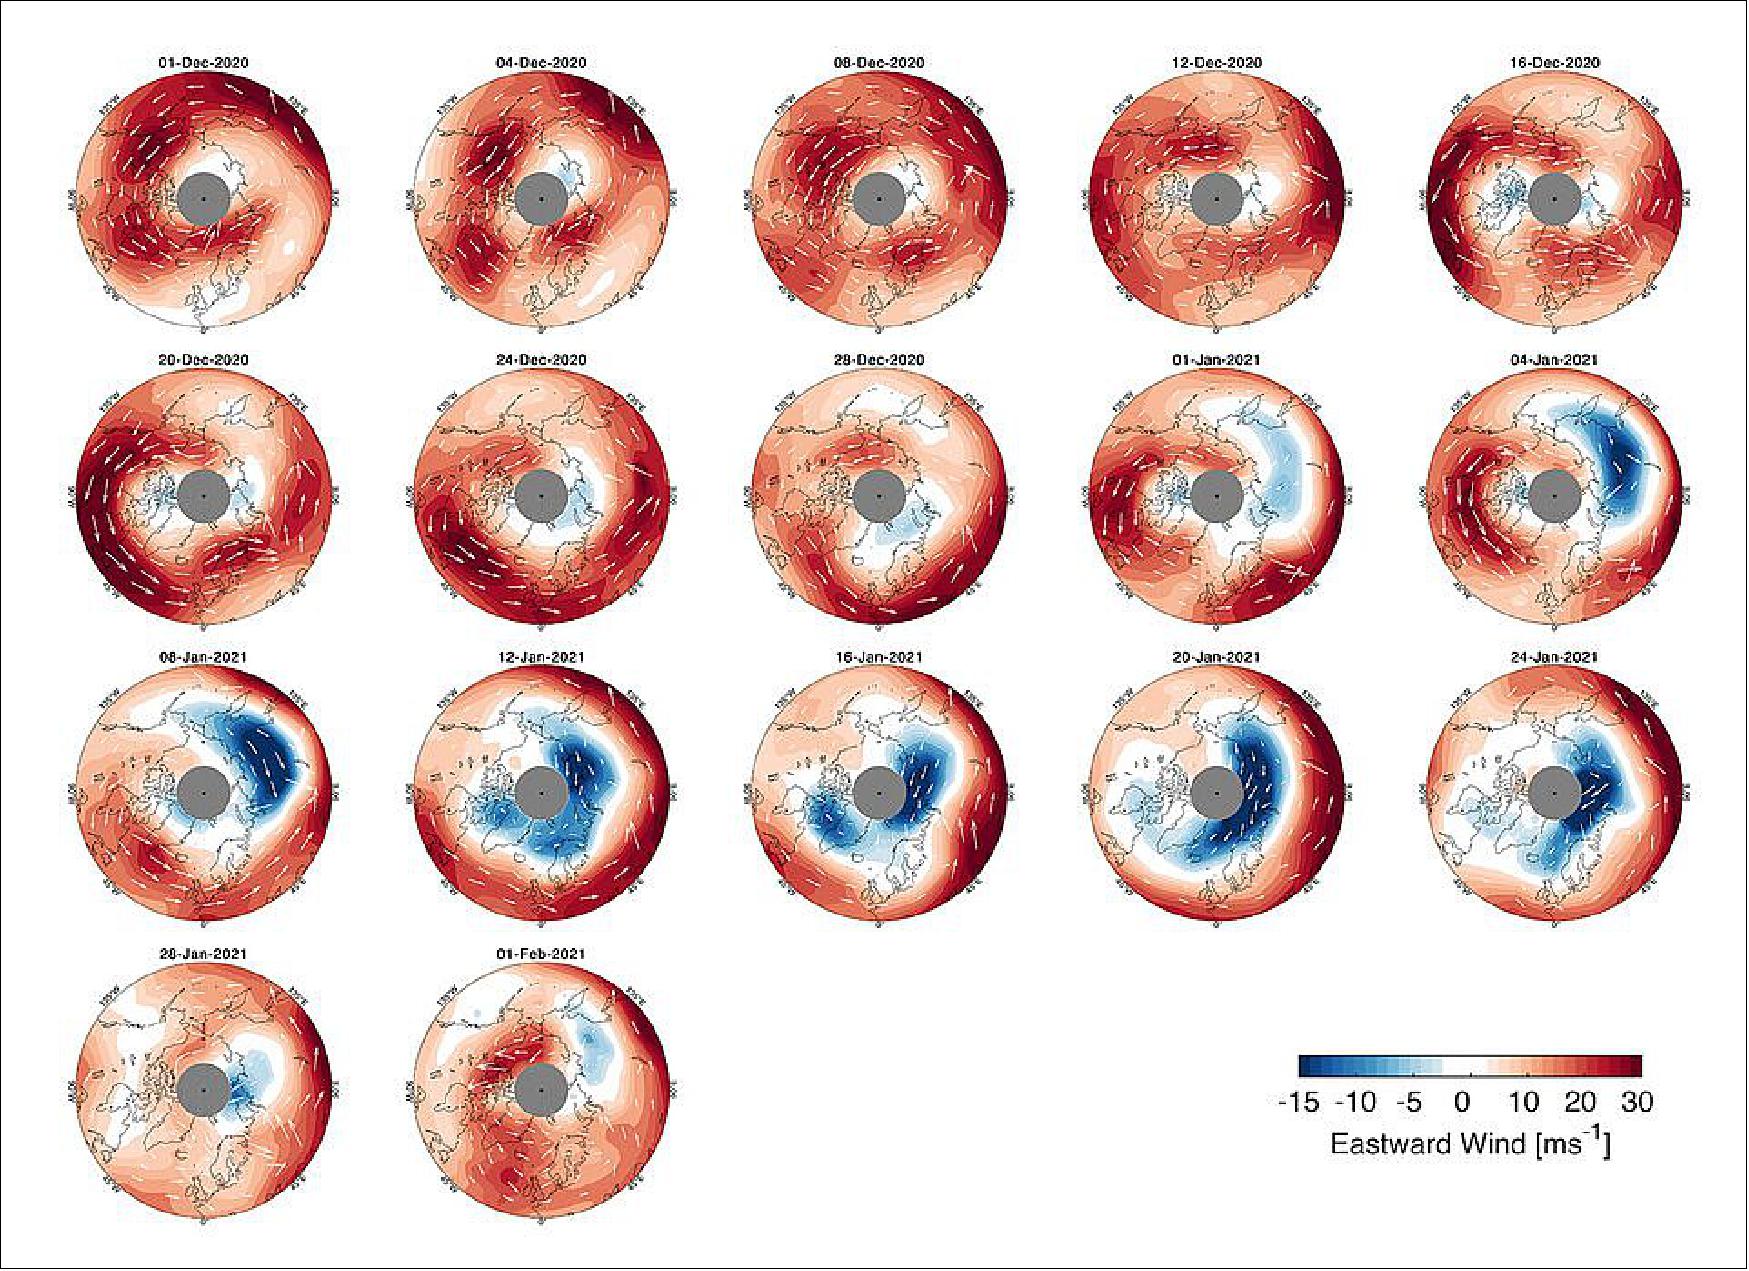 Figure 19: Based on data from ESA's Aeolus wind mission, the image shows how the polar vortex in the lower stratosphere changed between 1 December 2020 and 1 February 2021. The first few plots at the beginning of December show the vortex in a comparatively normal state, but in mid-December patches of blue wind appear, and the wind is going backwards relative to normal conditions (image credit: University of Bath/C. Wright)